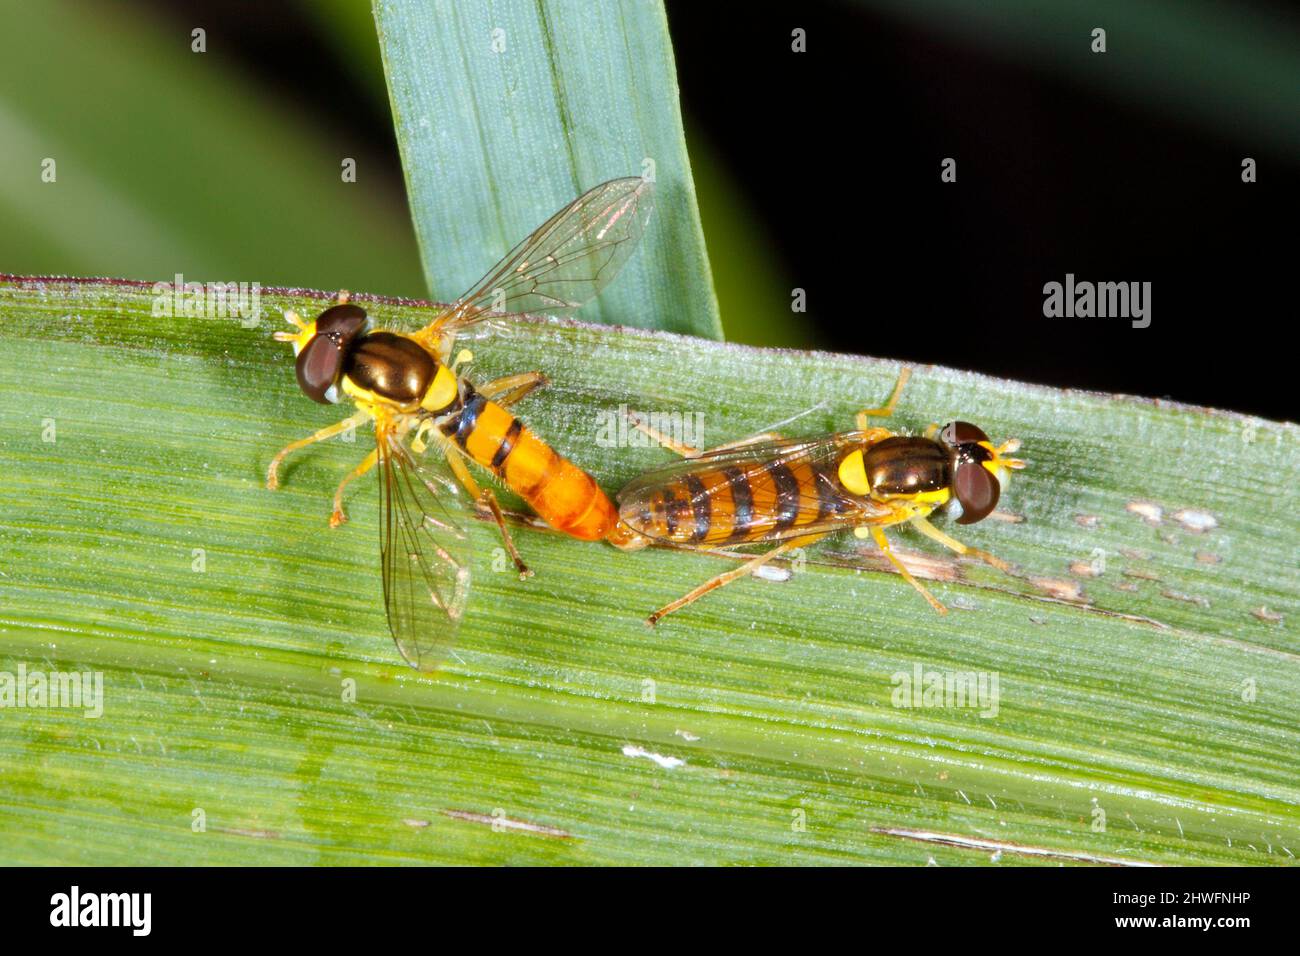 Probably Grey-banded Hoverfly, Episyrphus sp. Or this Hoverfly may be Episyrphus viridaureus. Also known as Black-banded Hoverfly and Flower fly. Mati Stock Photo